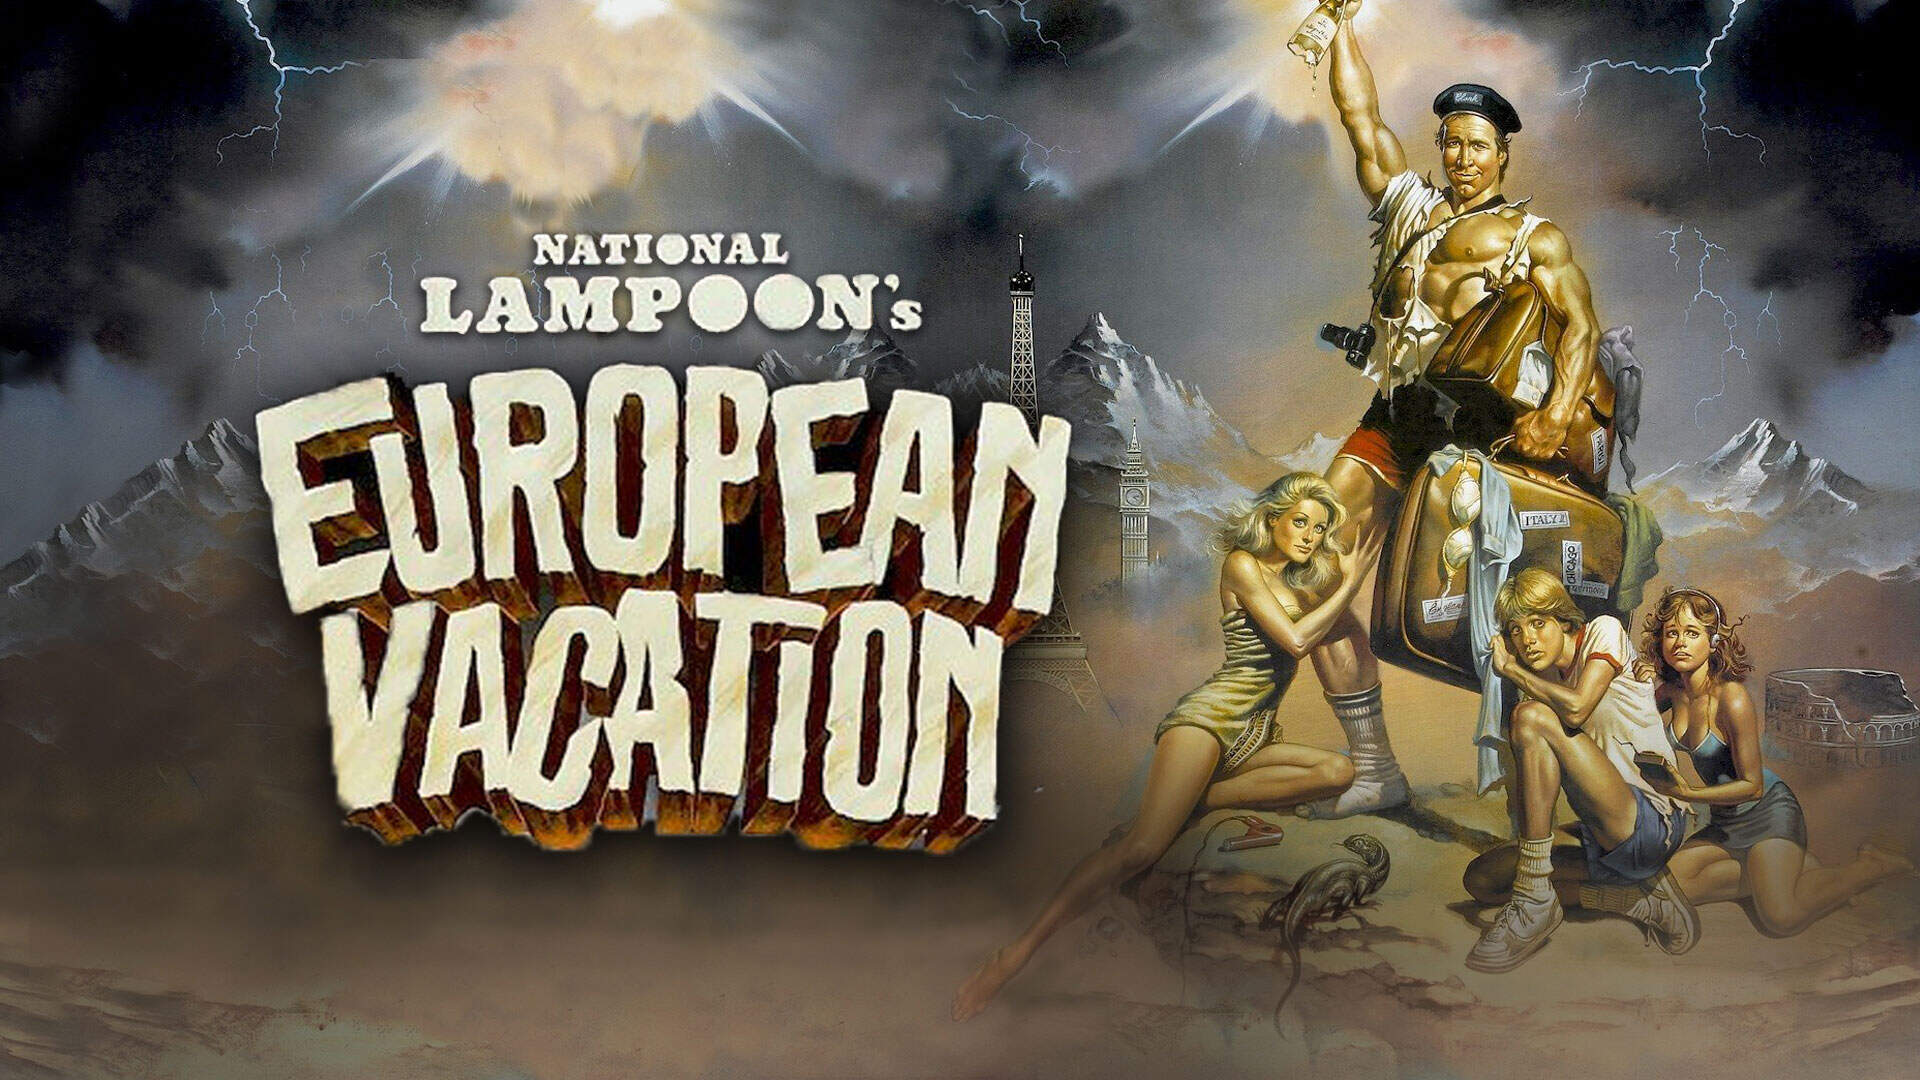 30-facts-about-the-movie-national-lampoons-european-vacation-1697036782.jpg